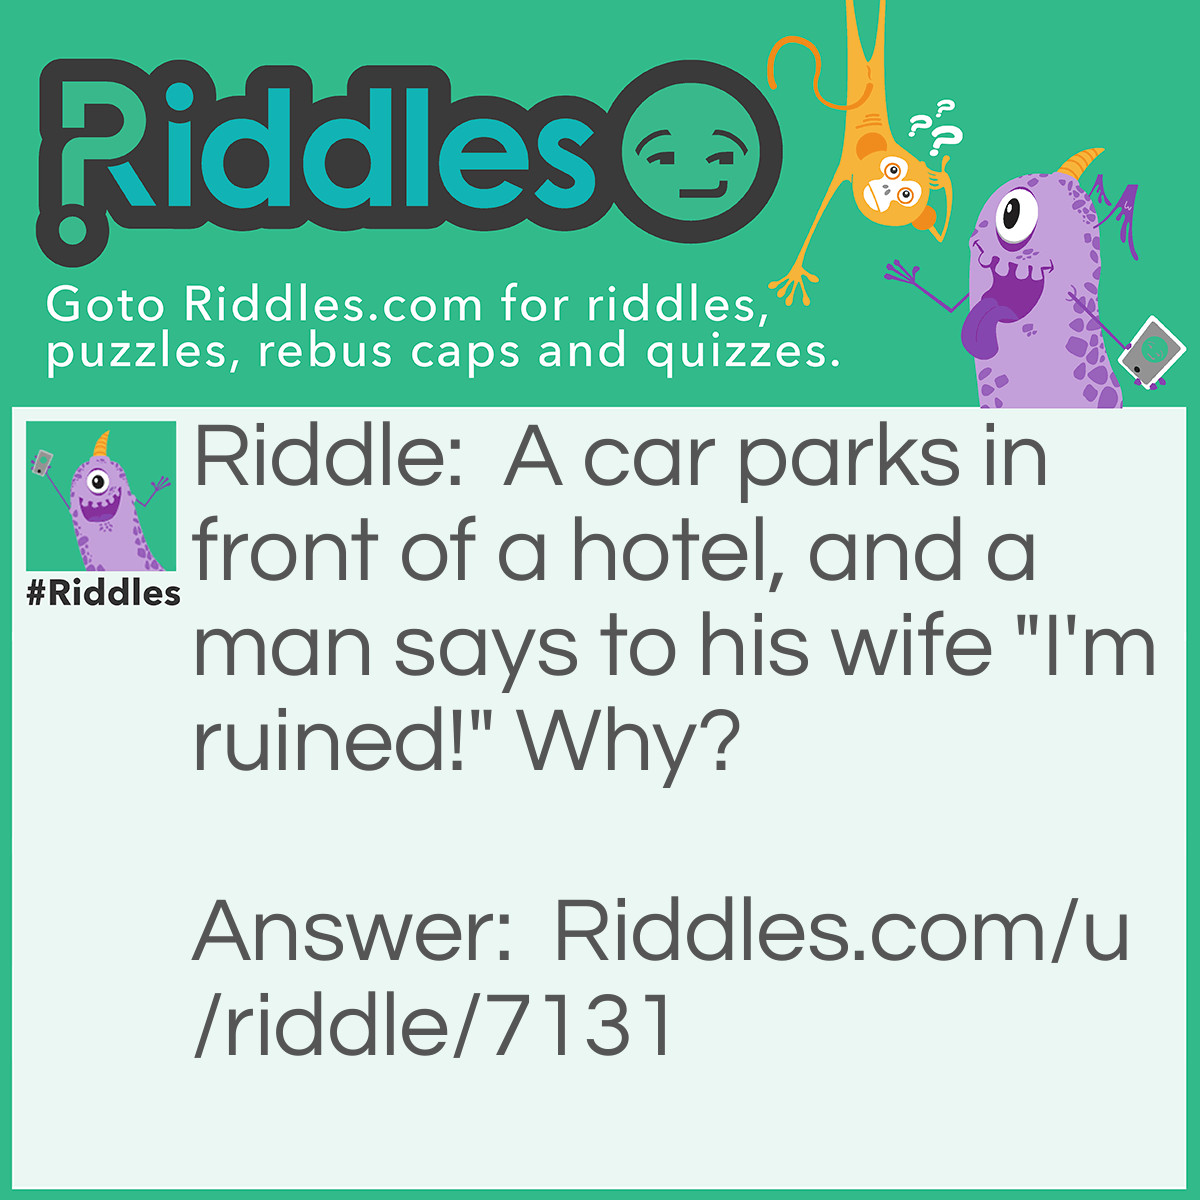 Riddle: A car parks in front of a hotel, and a man says to his wife "I'm ruined!" Why? Answer: They were playing Monopoly, the husband had to pay the fee for the hotel.